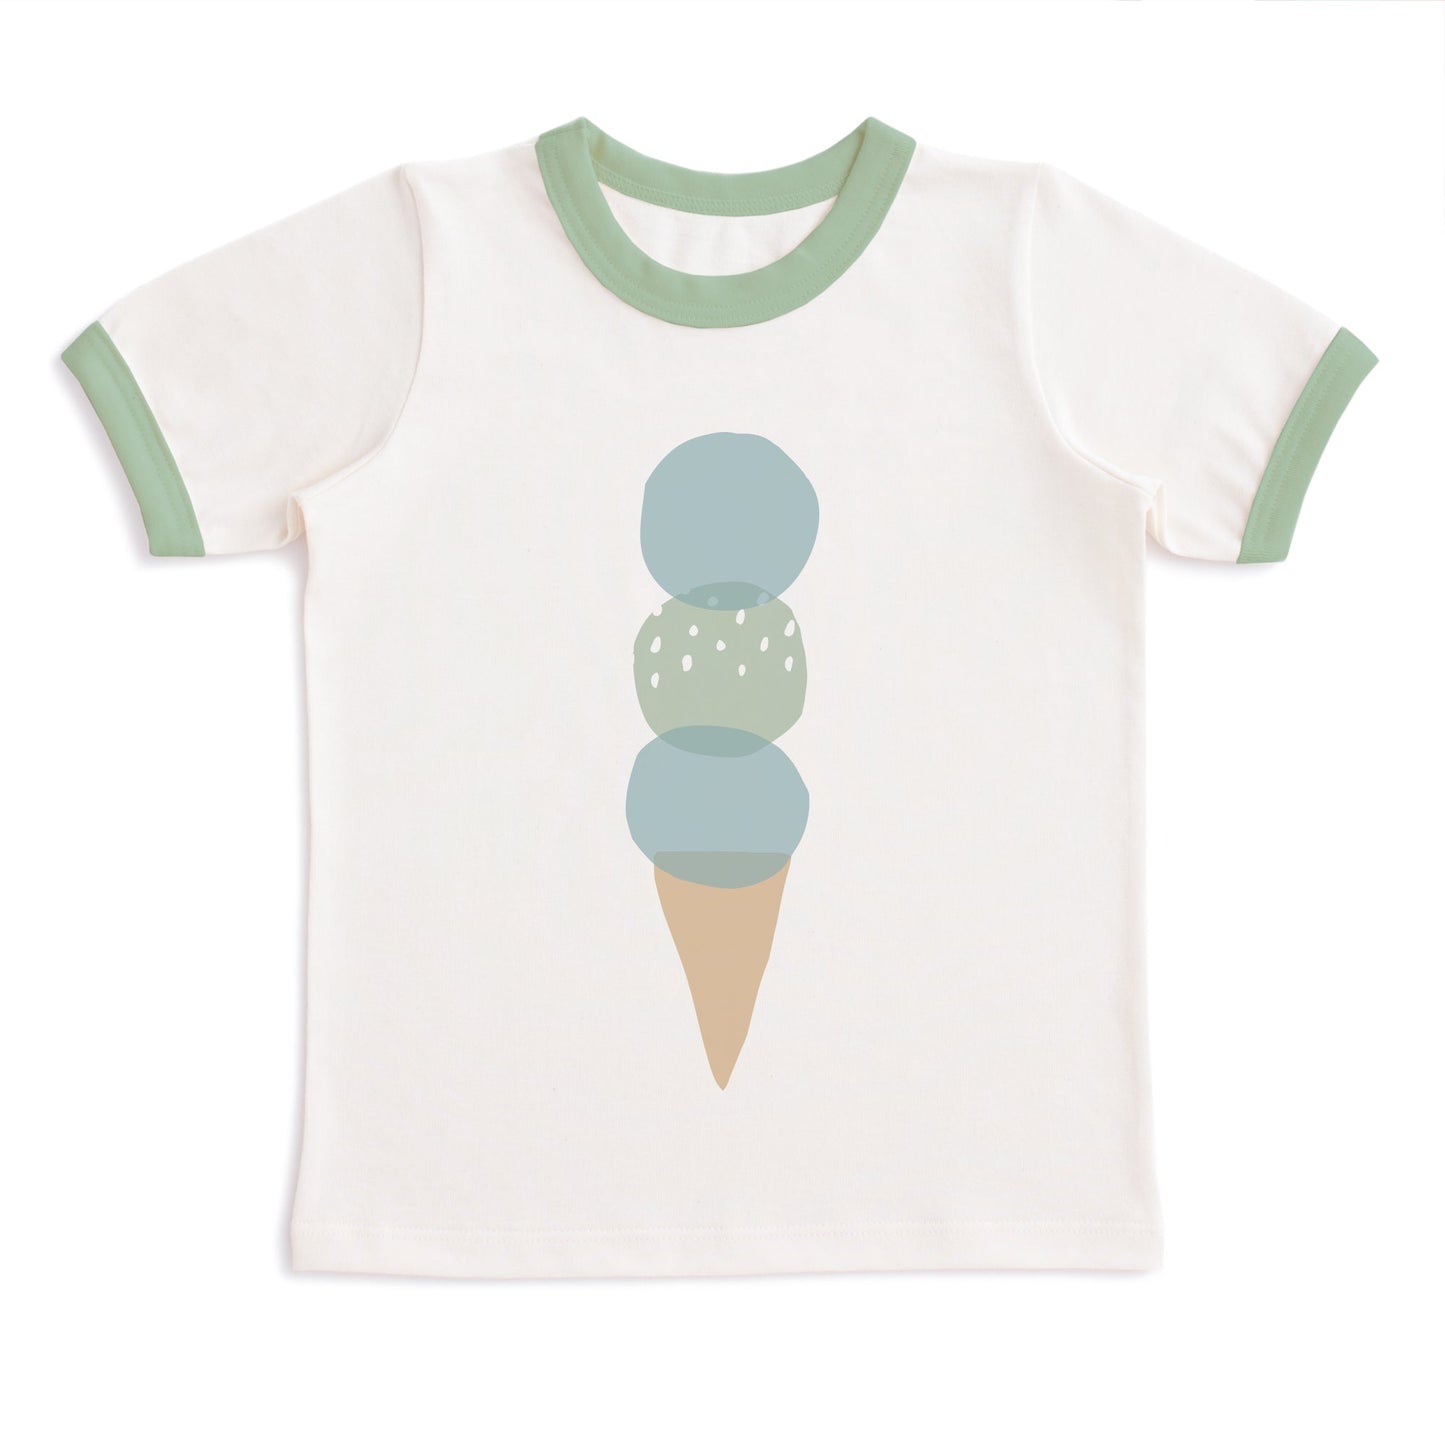 GRAPHIC Ringer Tee - Ice Cream Cone Natural & Meadow Green